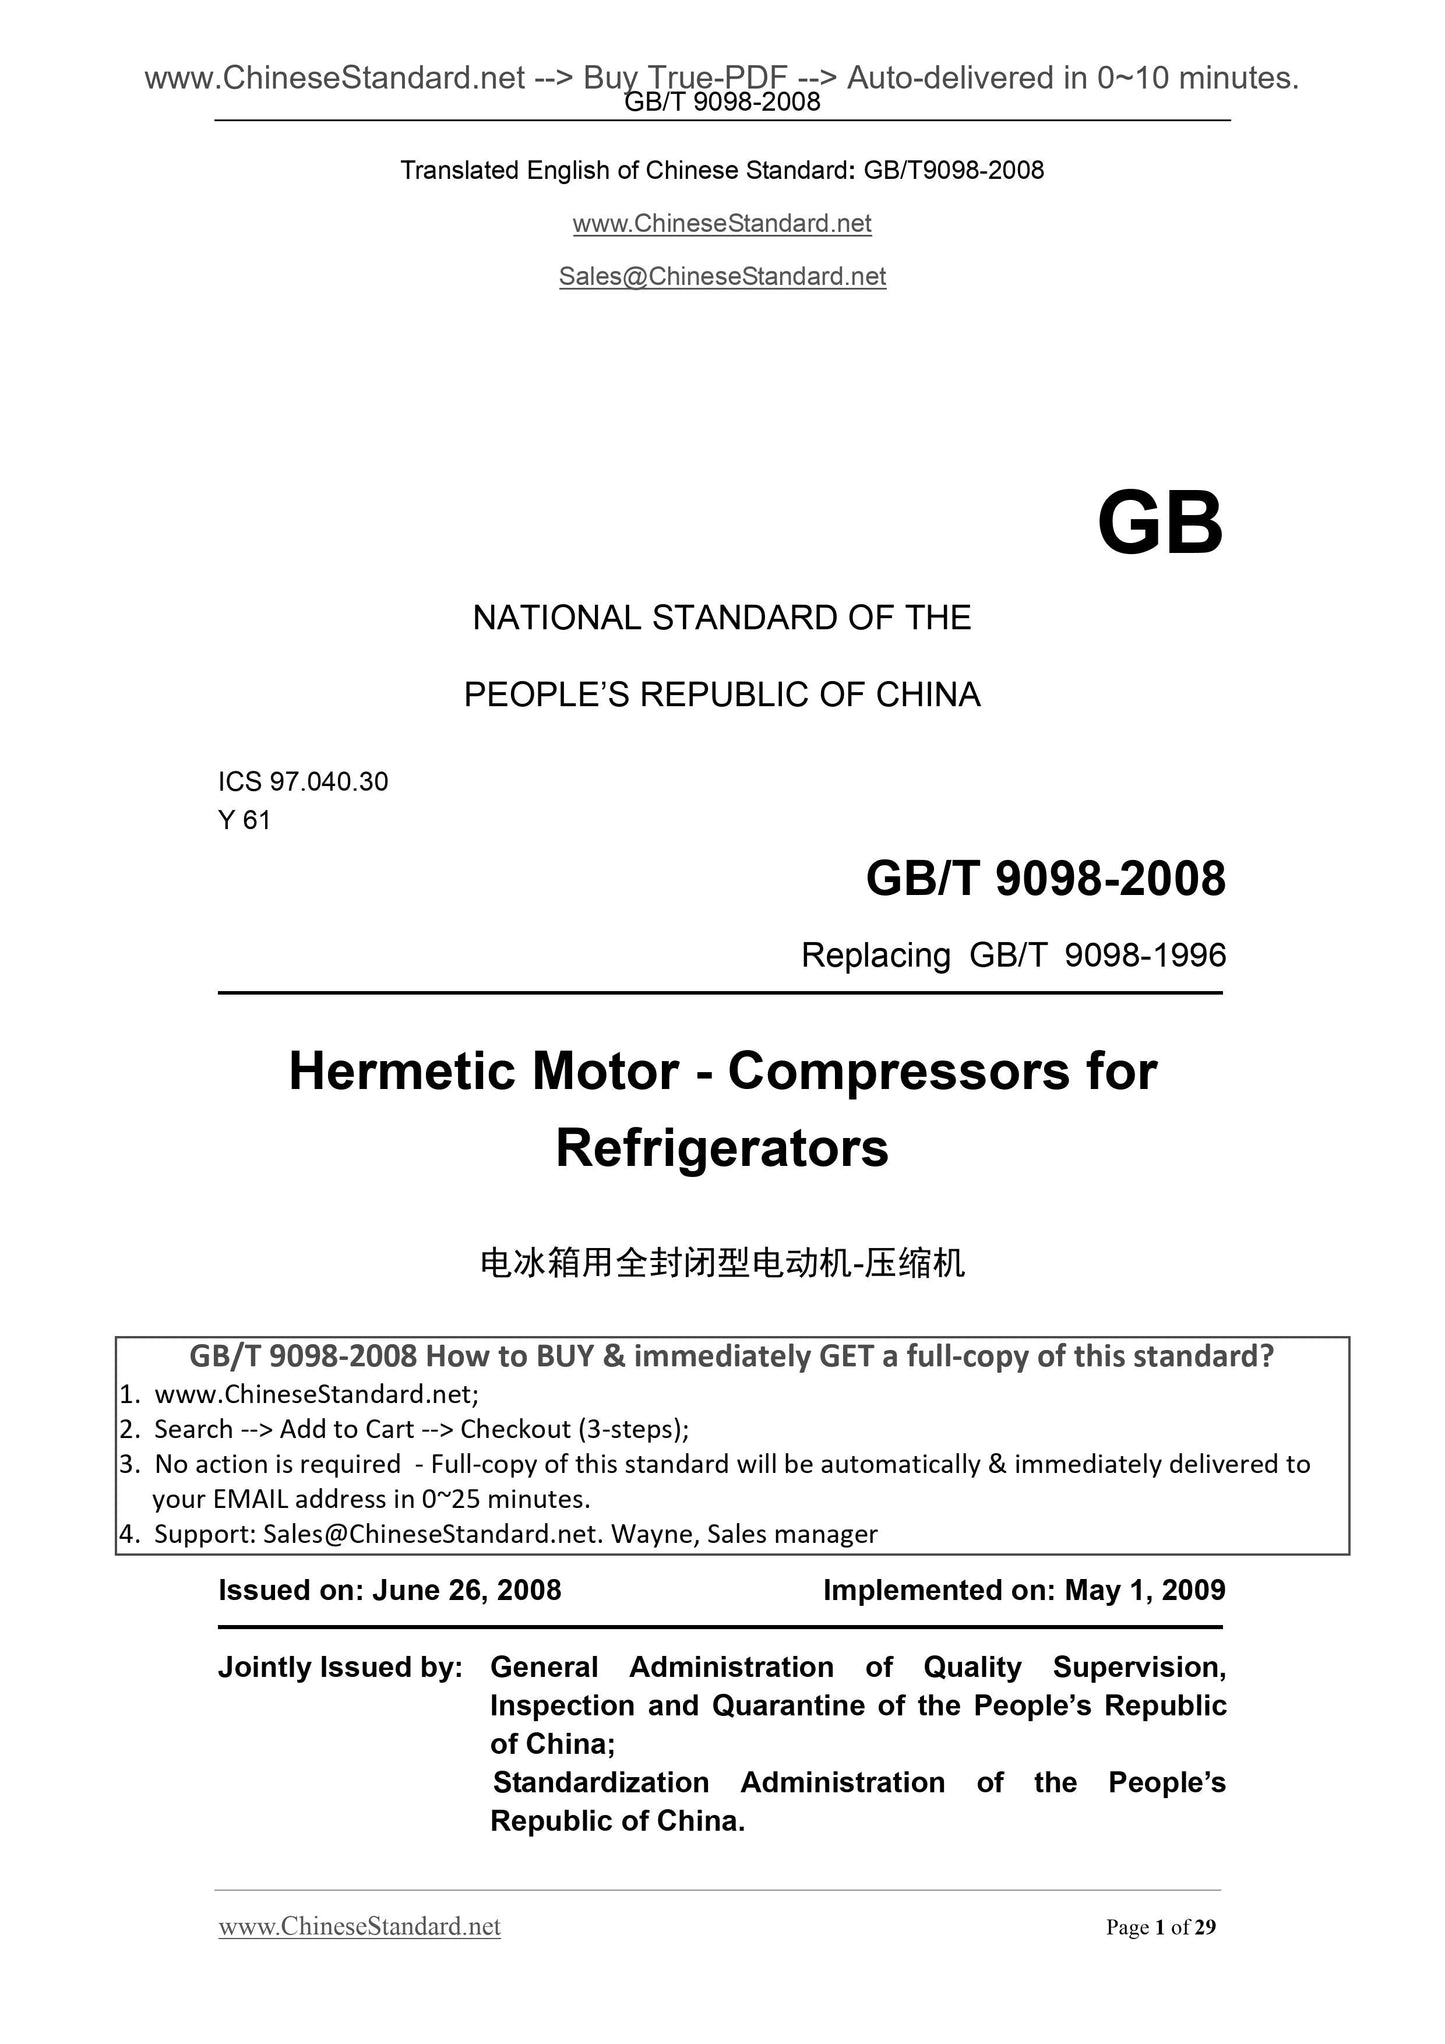 GB/T 9098-2008 Page 1